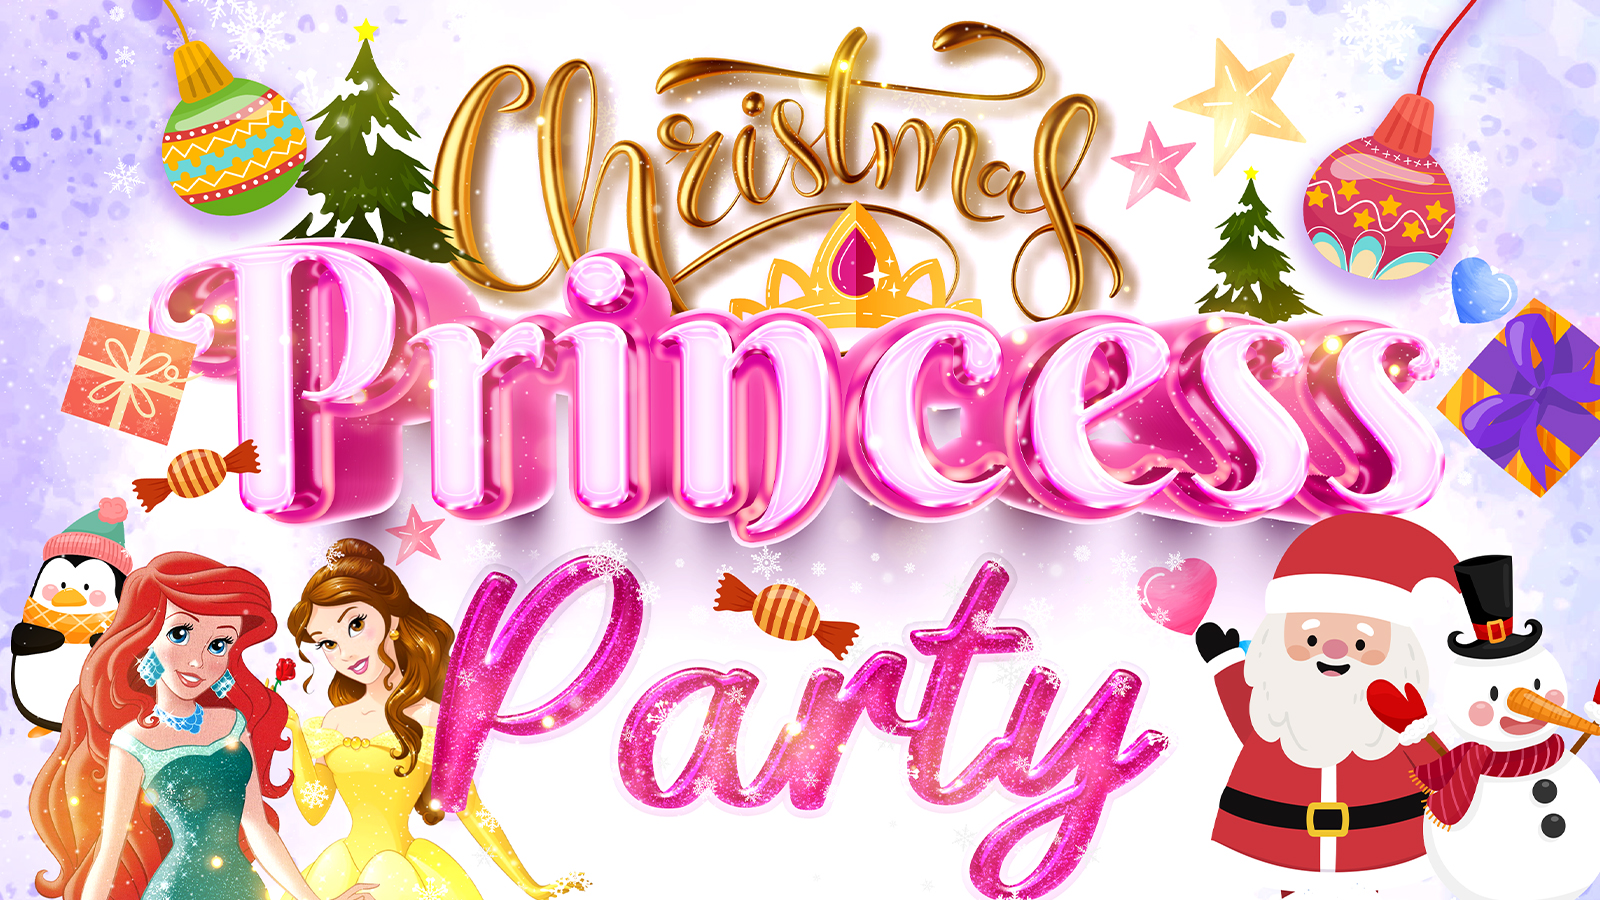 👑 👸🏼 THE CHRISTMAS PRINCESS PARTY at 11.30am – live sing-a-longs and games 👸🏼 👑  with Ariel and Belle